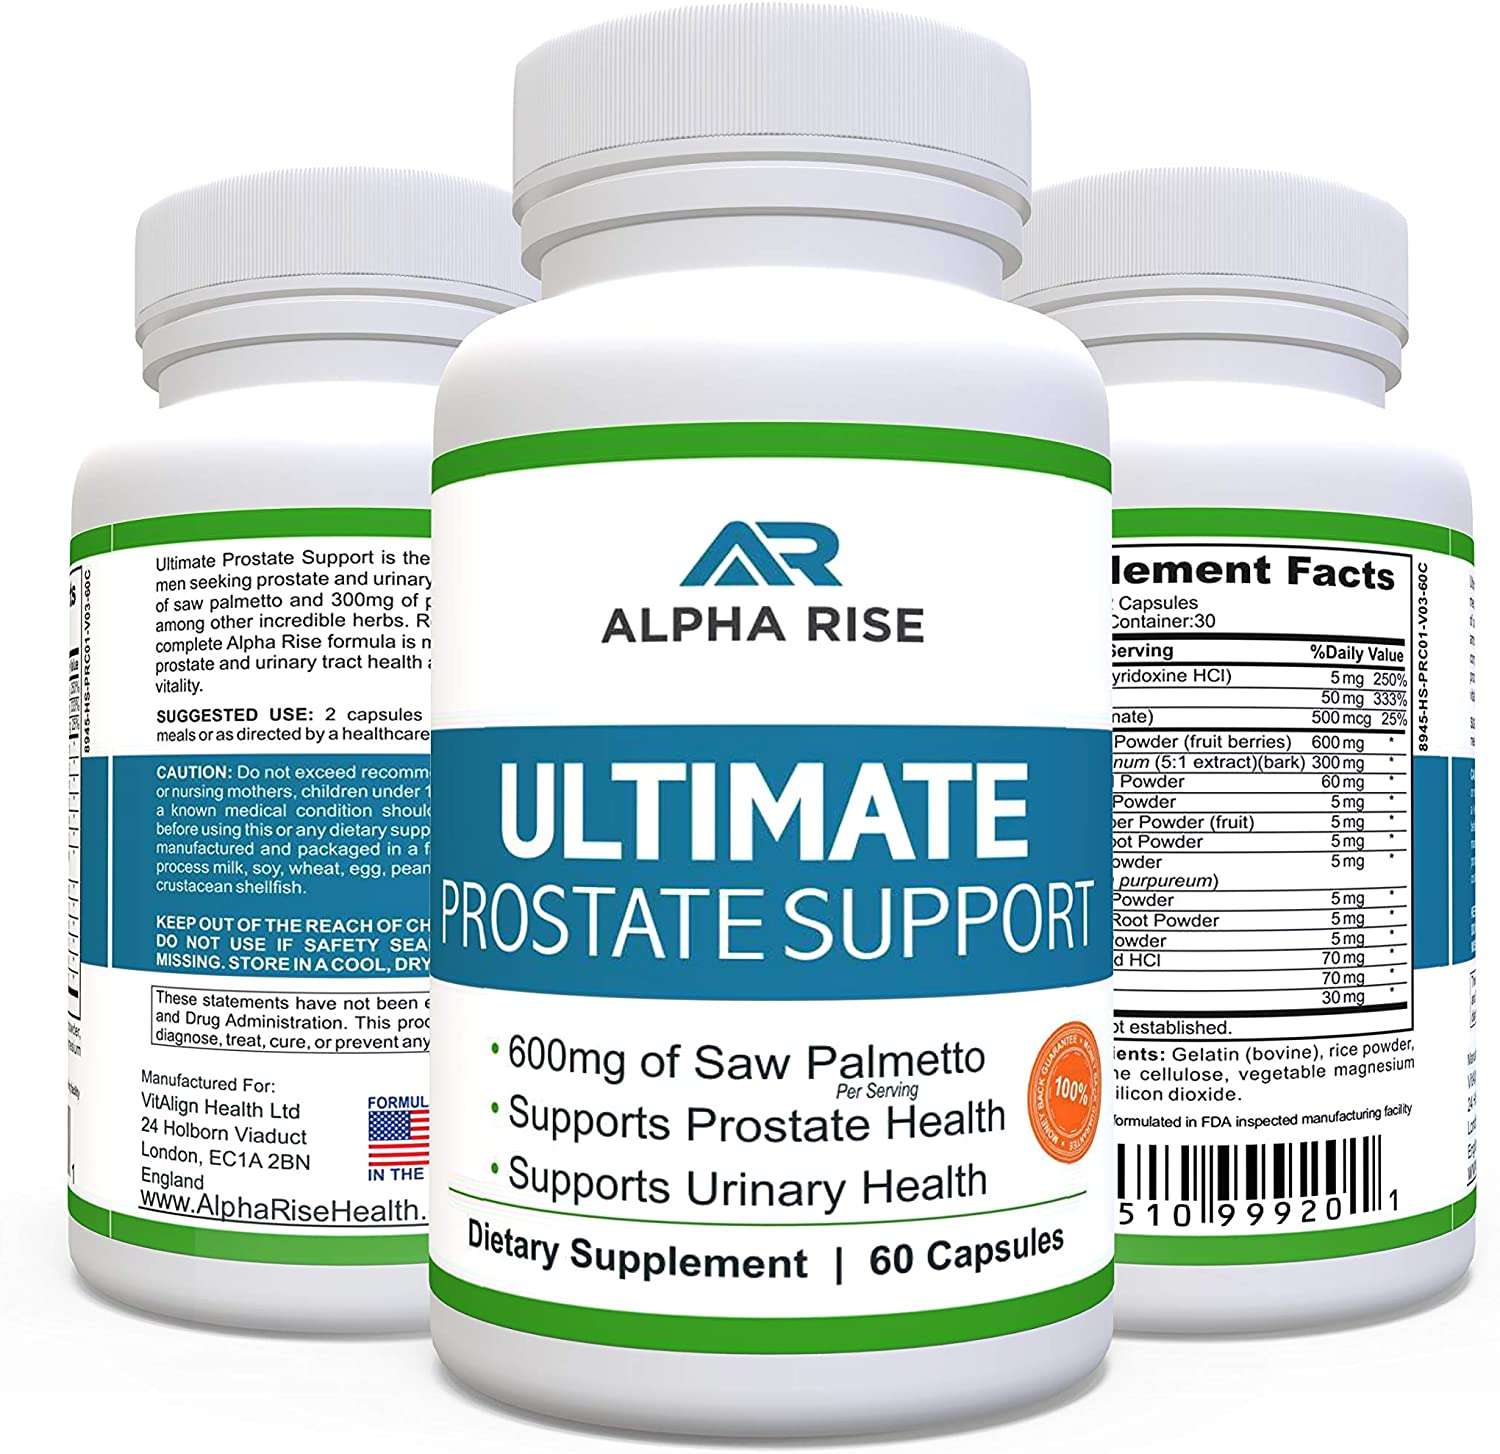 TOP RATED Prostate Supplement